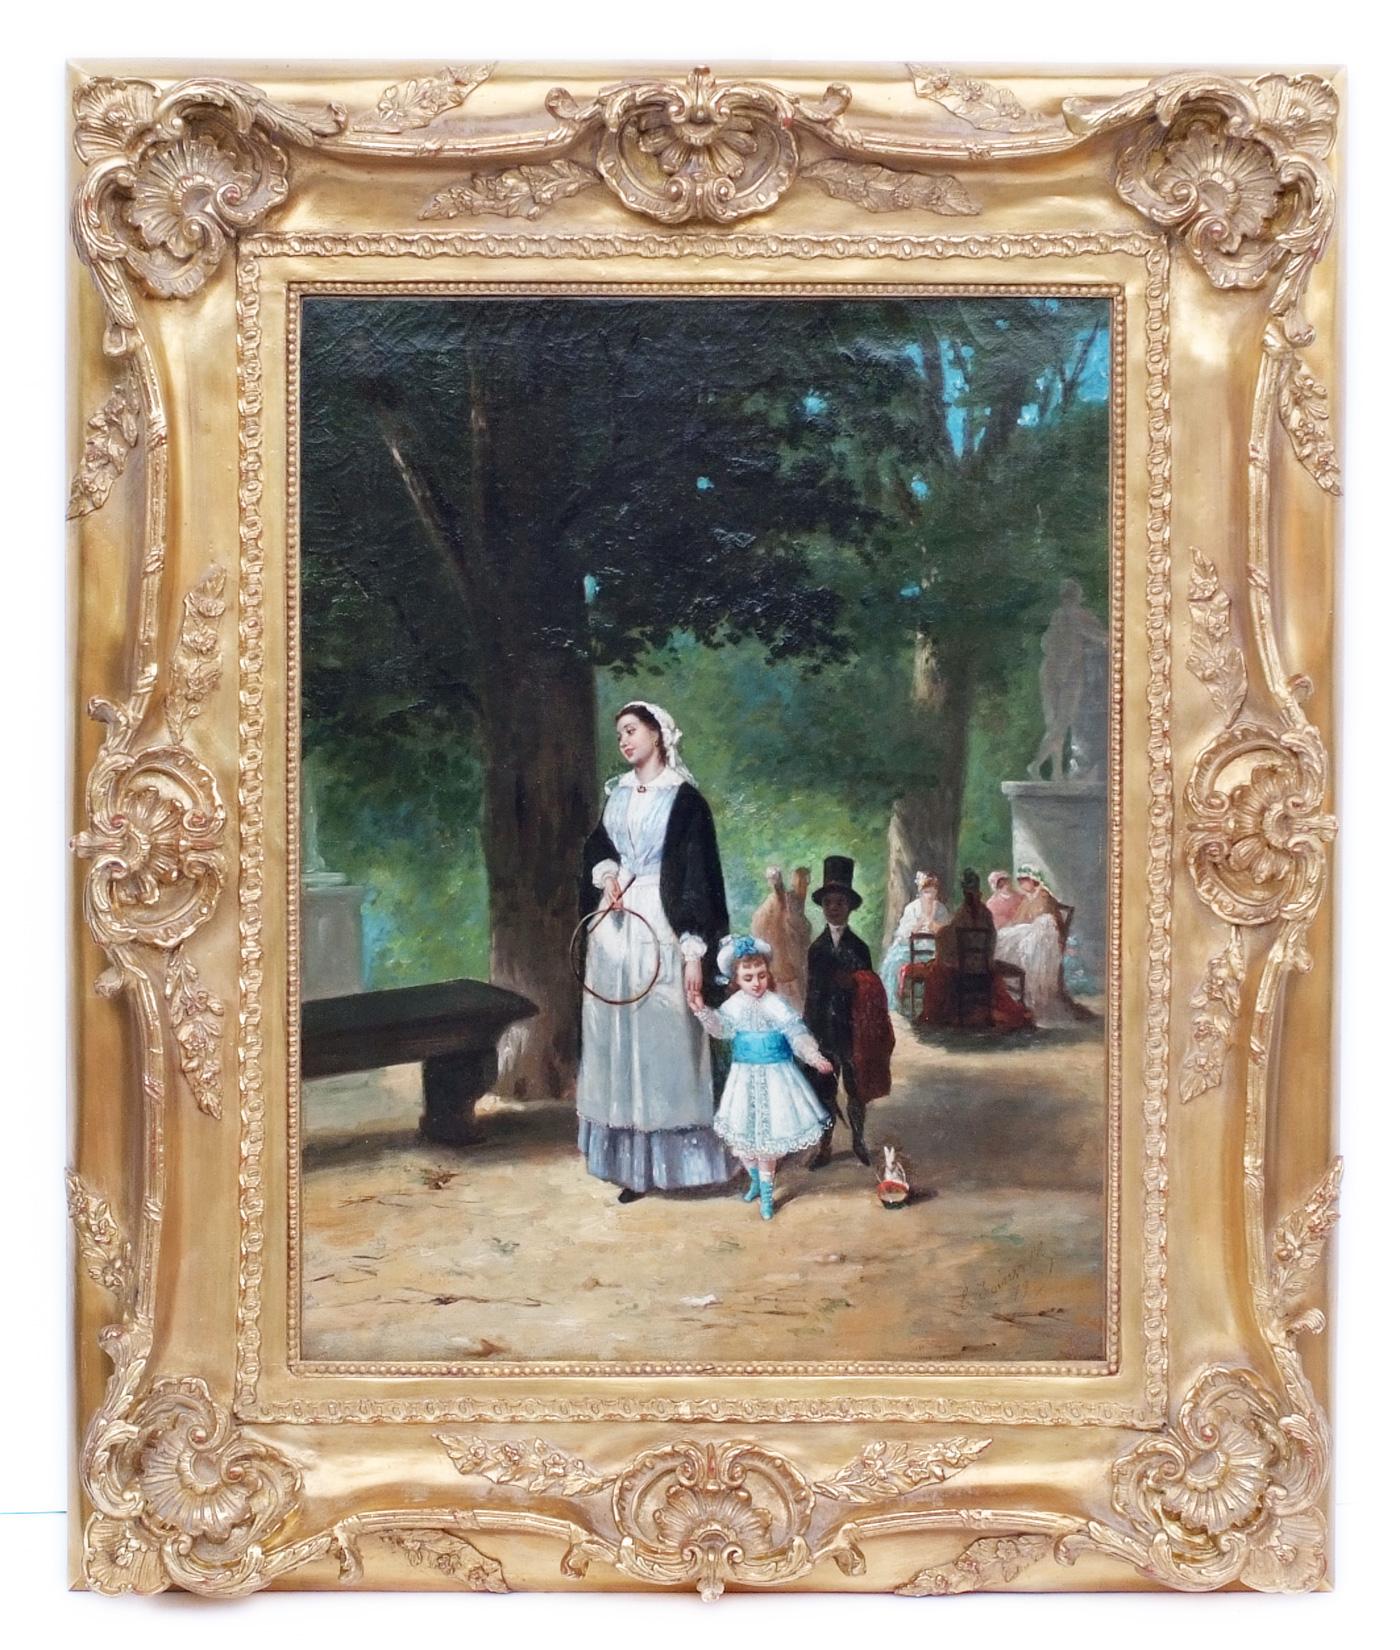 Ludwig KNAUS  Portrait Painting - The walk in Luxembourg Garden in Paris, also called "The Privileged"